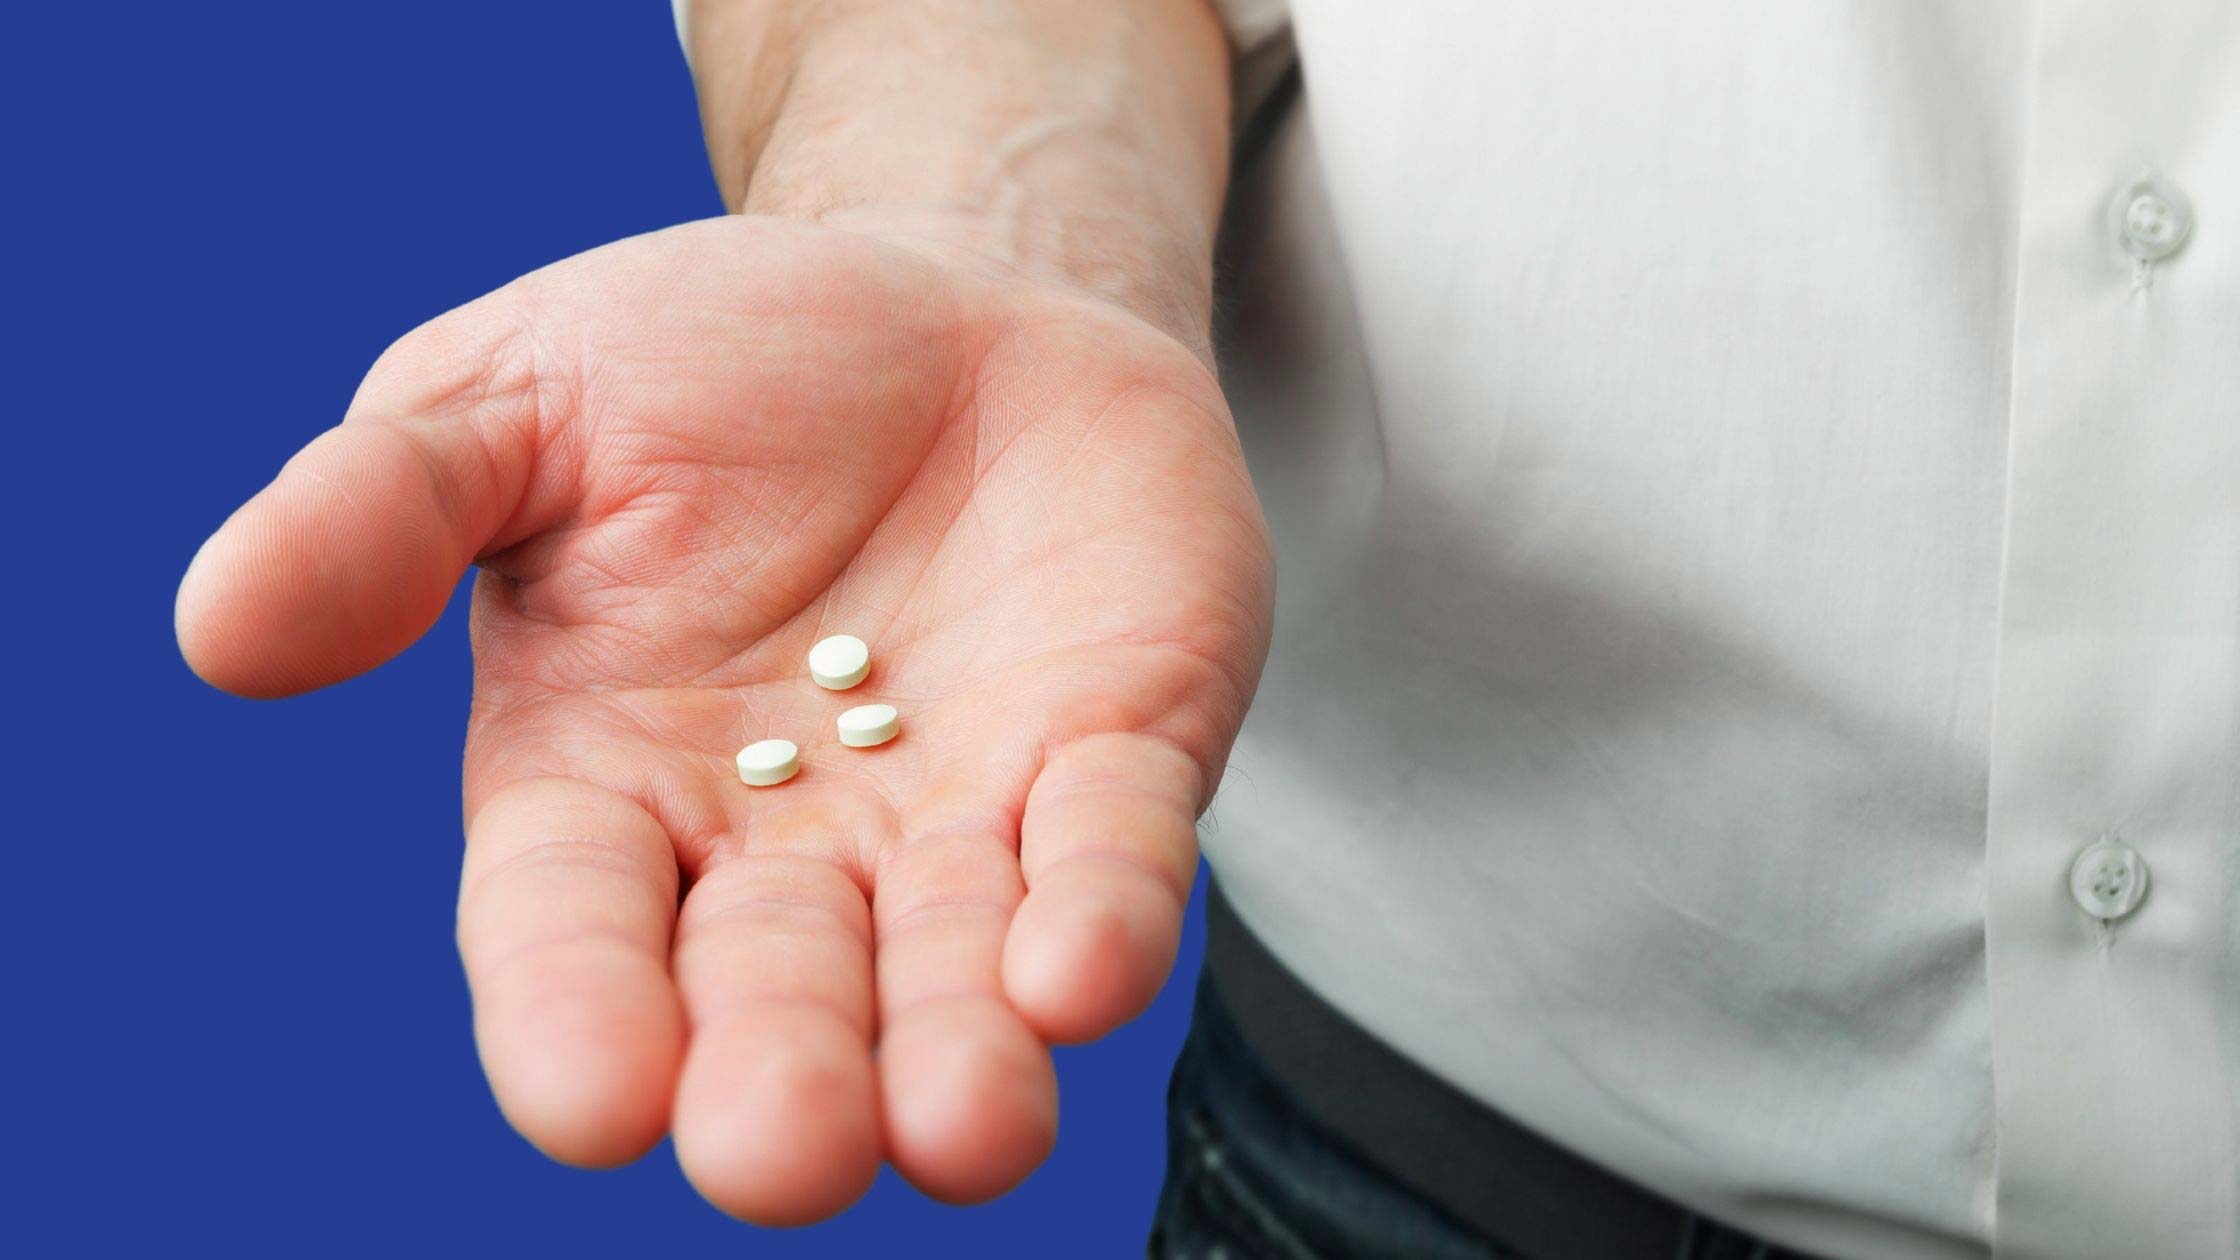 Mosie Baby article image, Clomid for men 101: uses, side effects, and dosage. Image of man holding three white pills